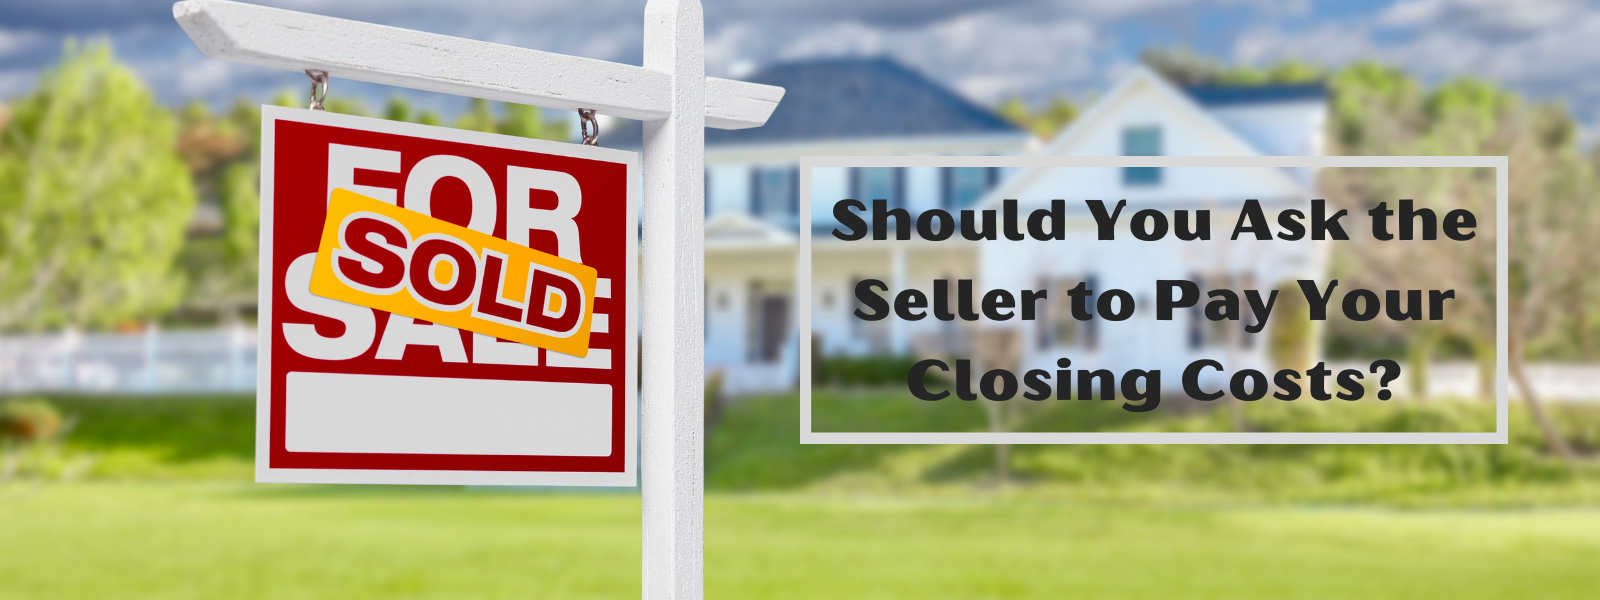 Should you ask the seller to pay your closing costs